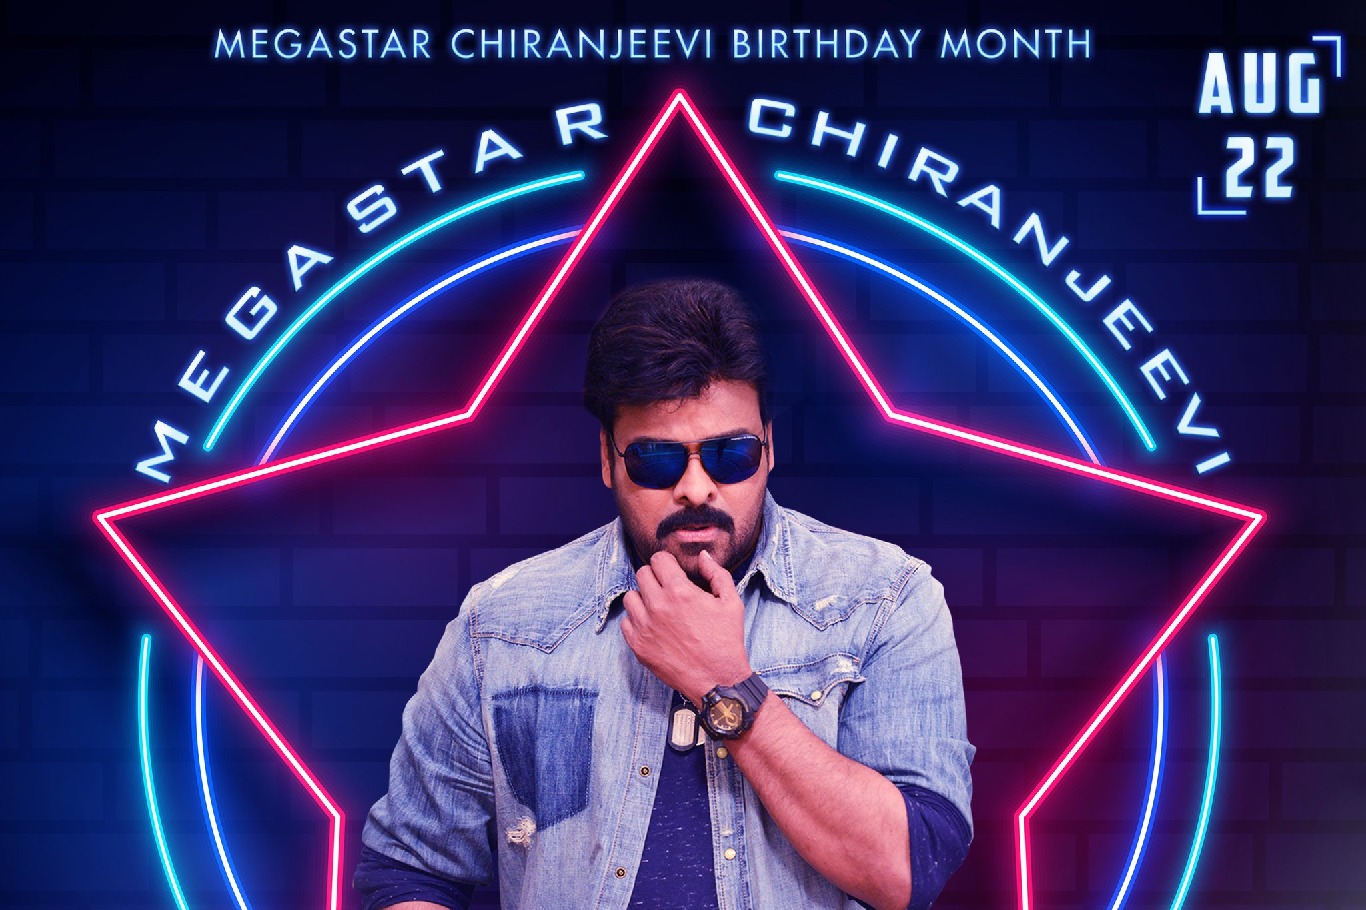 chiru birthday special poster going to release